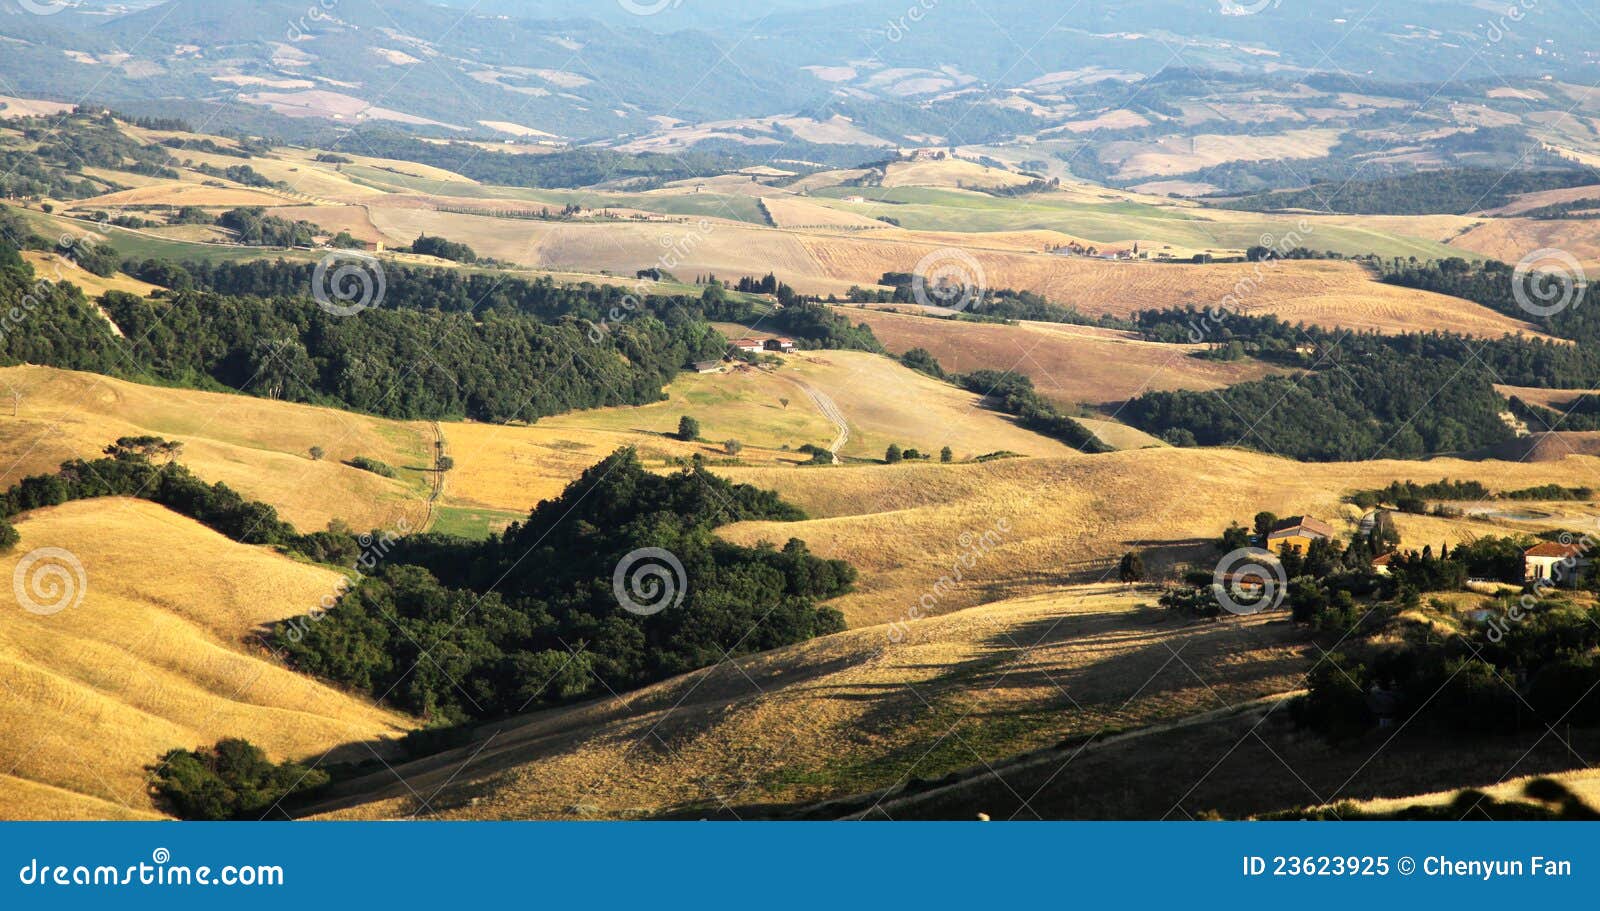 landscape in toscana